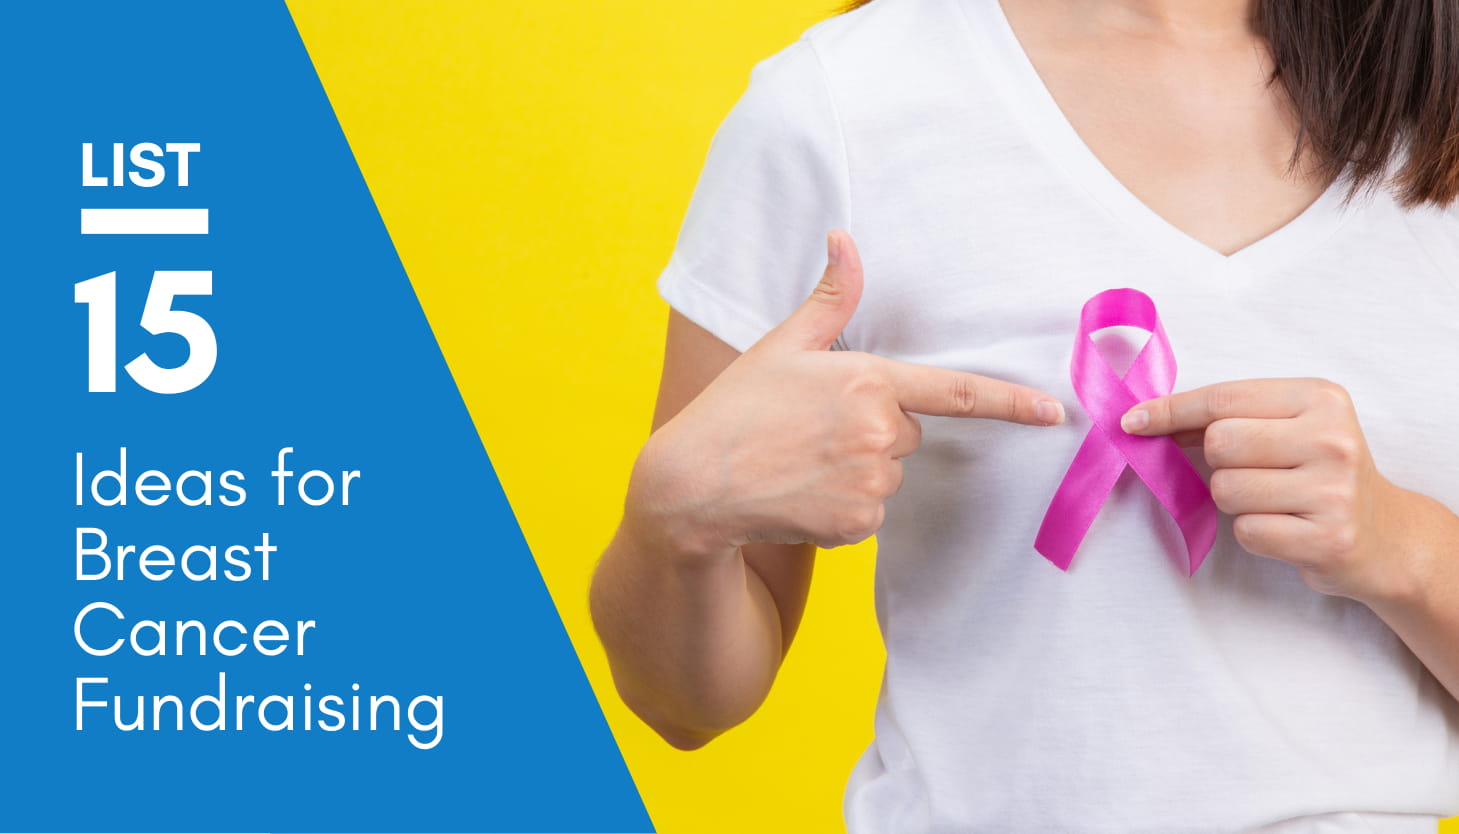 15 Breast Cancer Fundraising Ideas for Treatment Research & Awareness